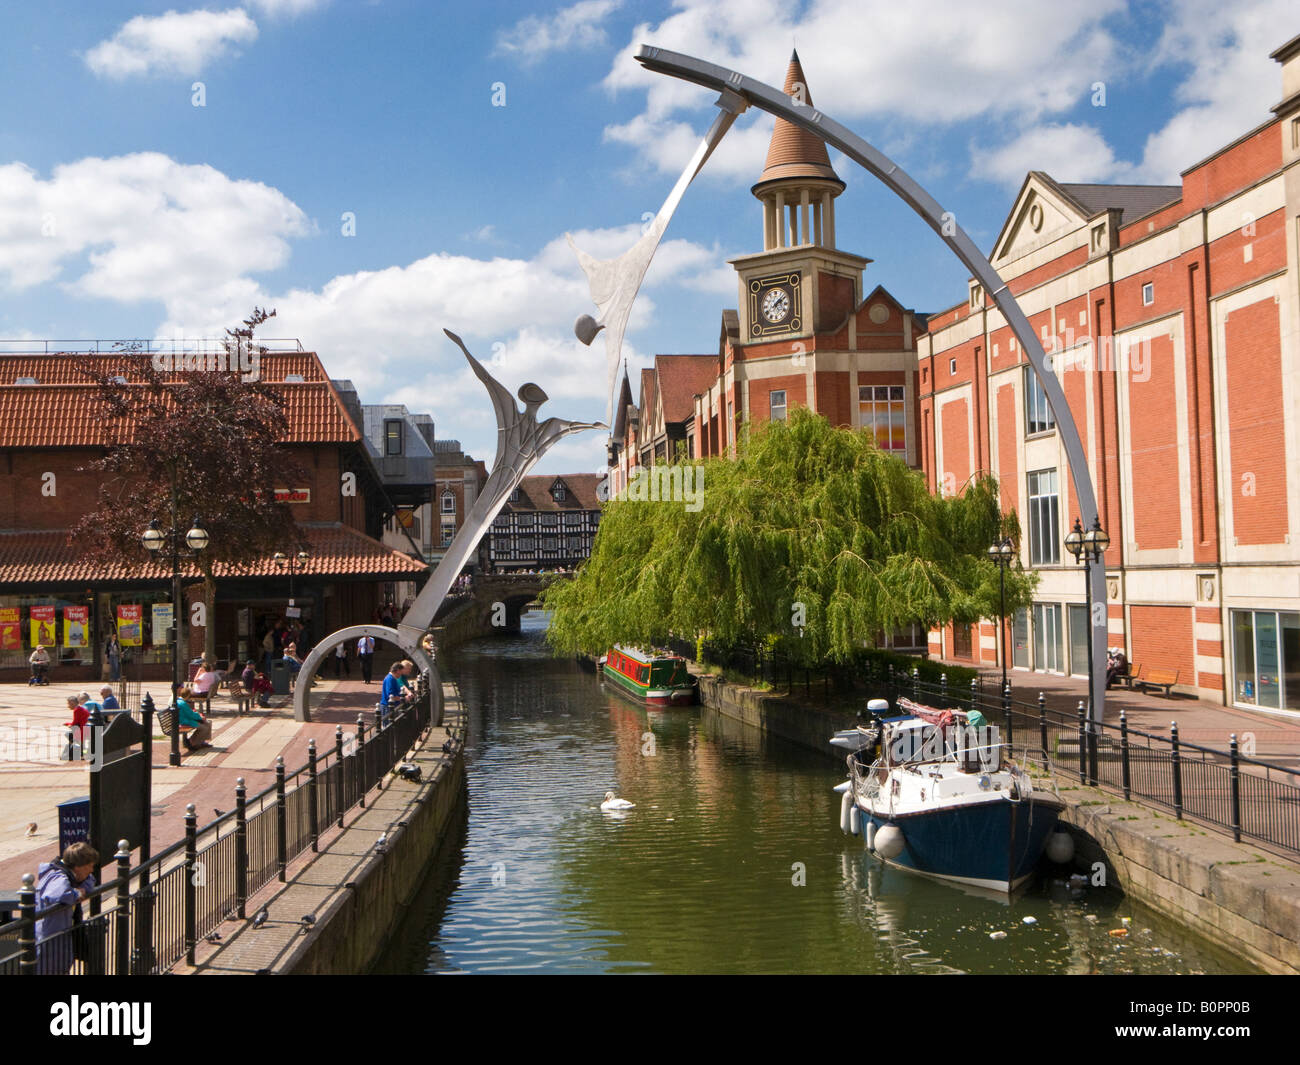 River Witham and the Empowerment sculpture in Lincoln city centre Waterside district, Lincoln, England, UK Stock Photo